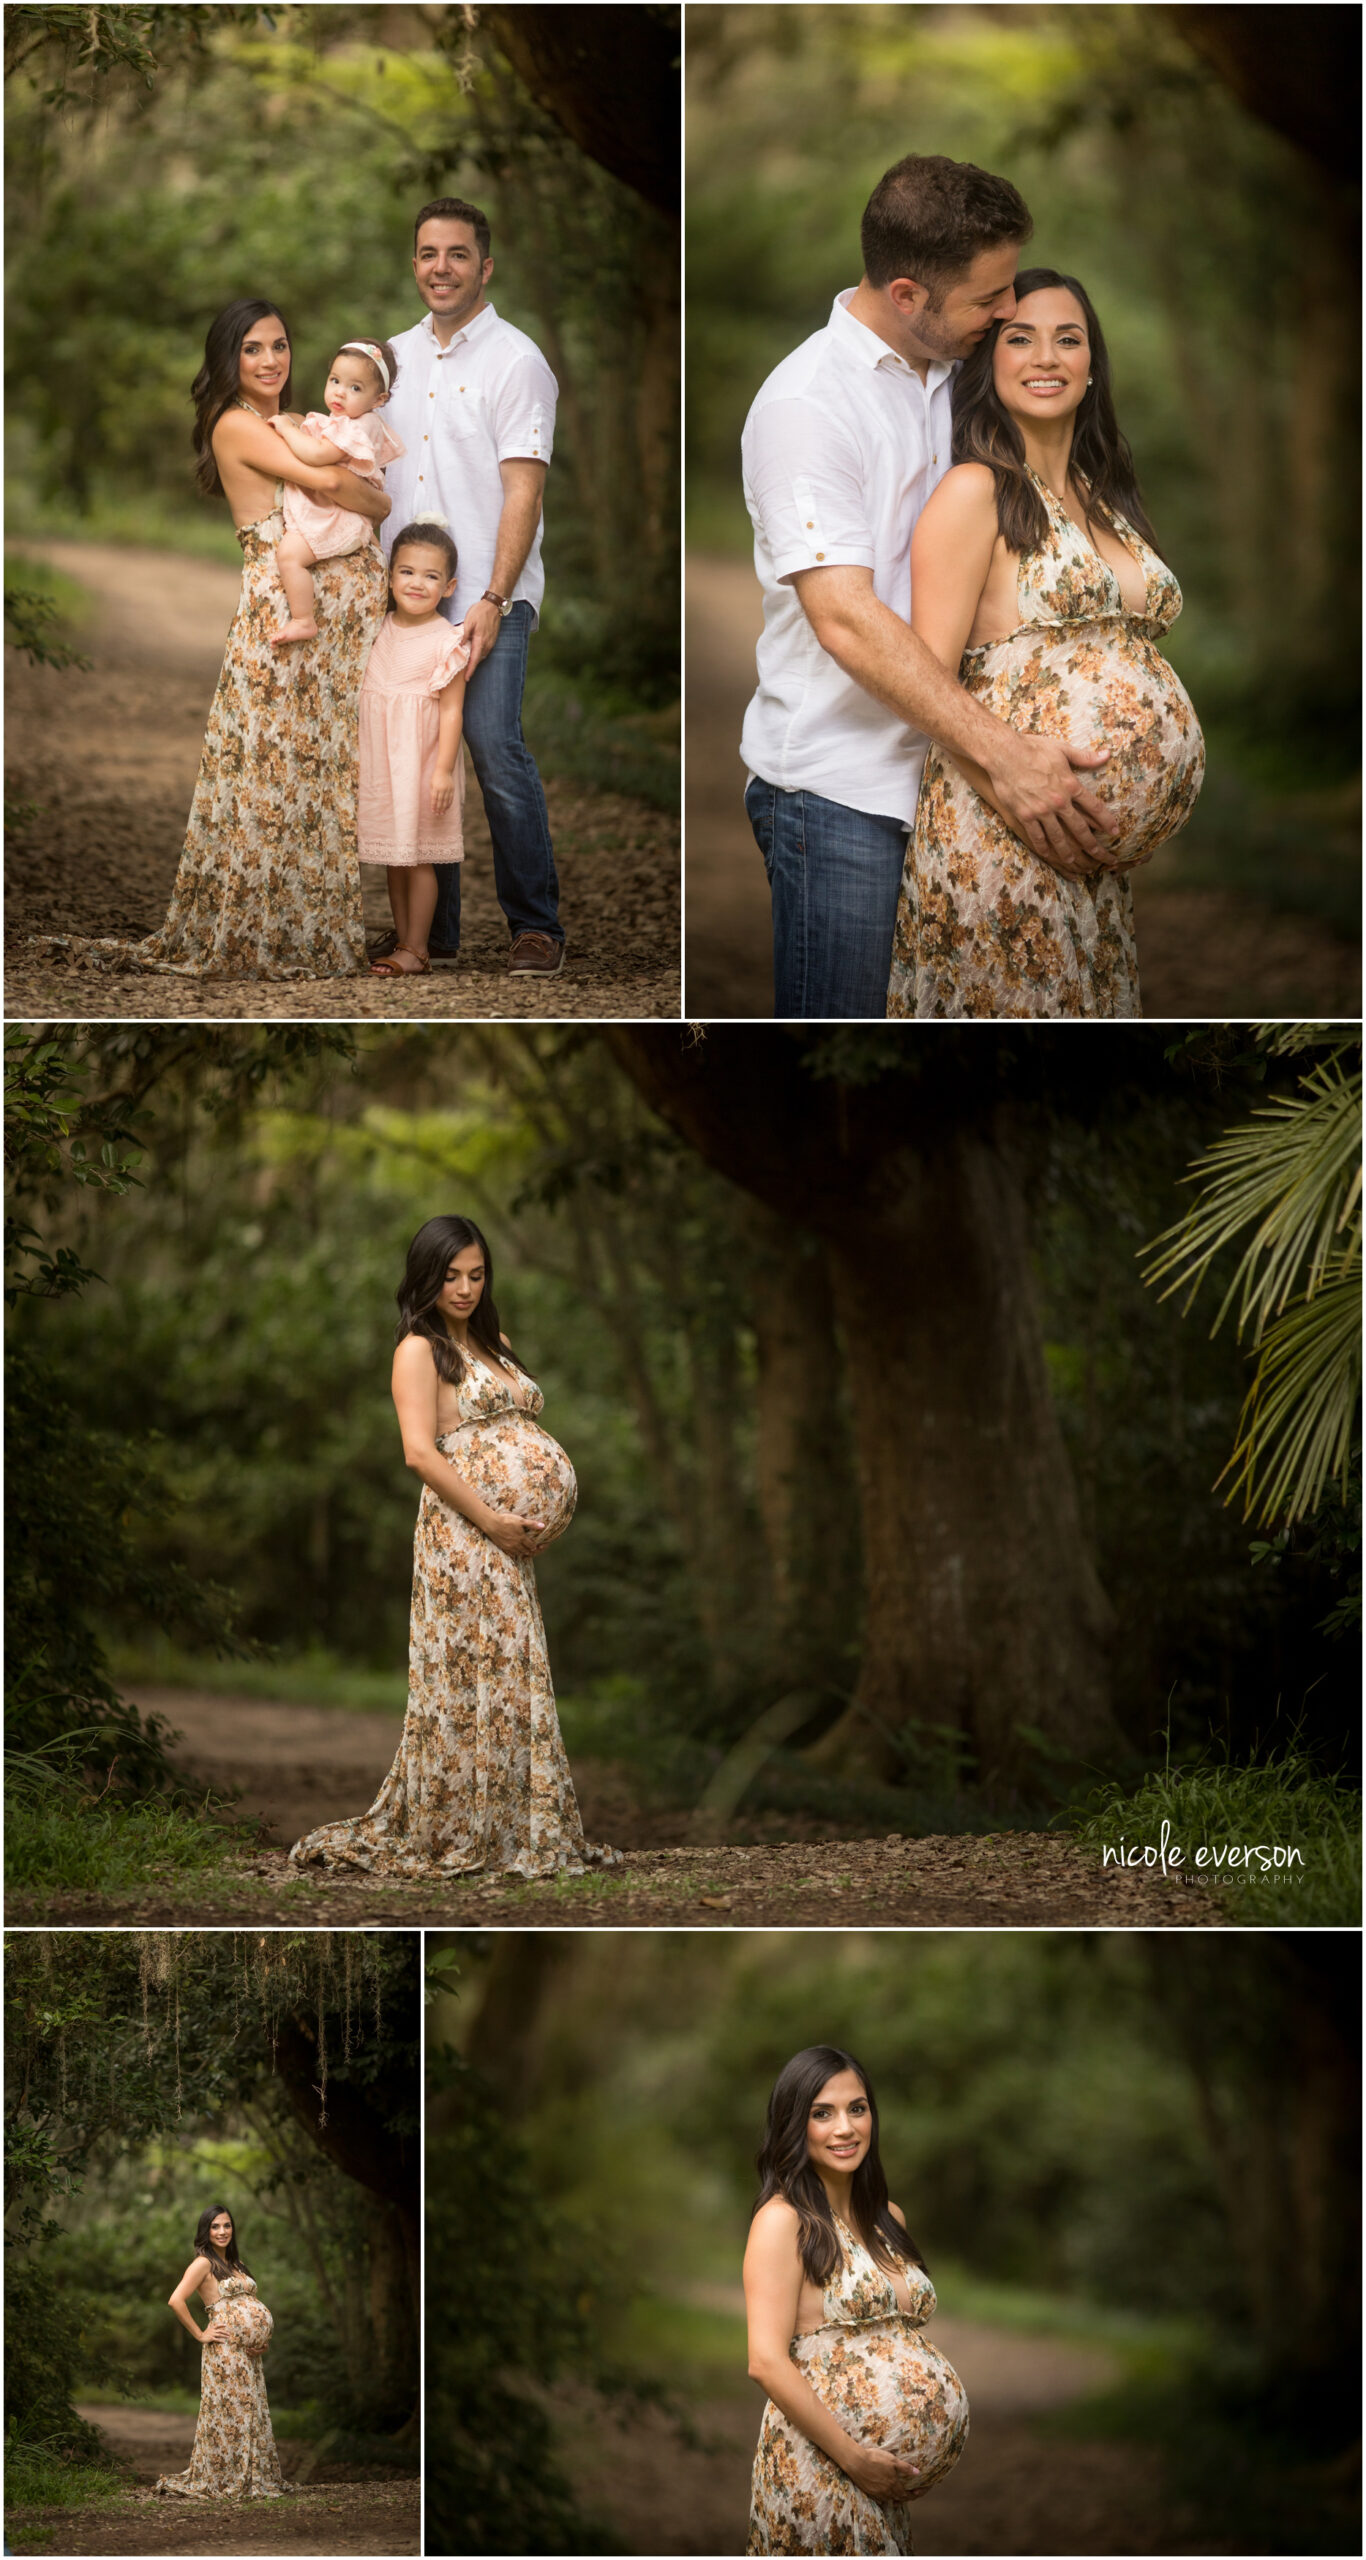 How to Pose Maternity Photos with Siblings | Maria Snider Photography